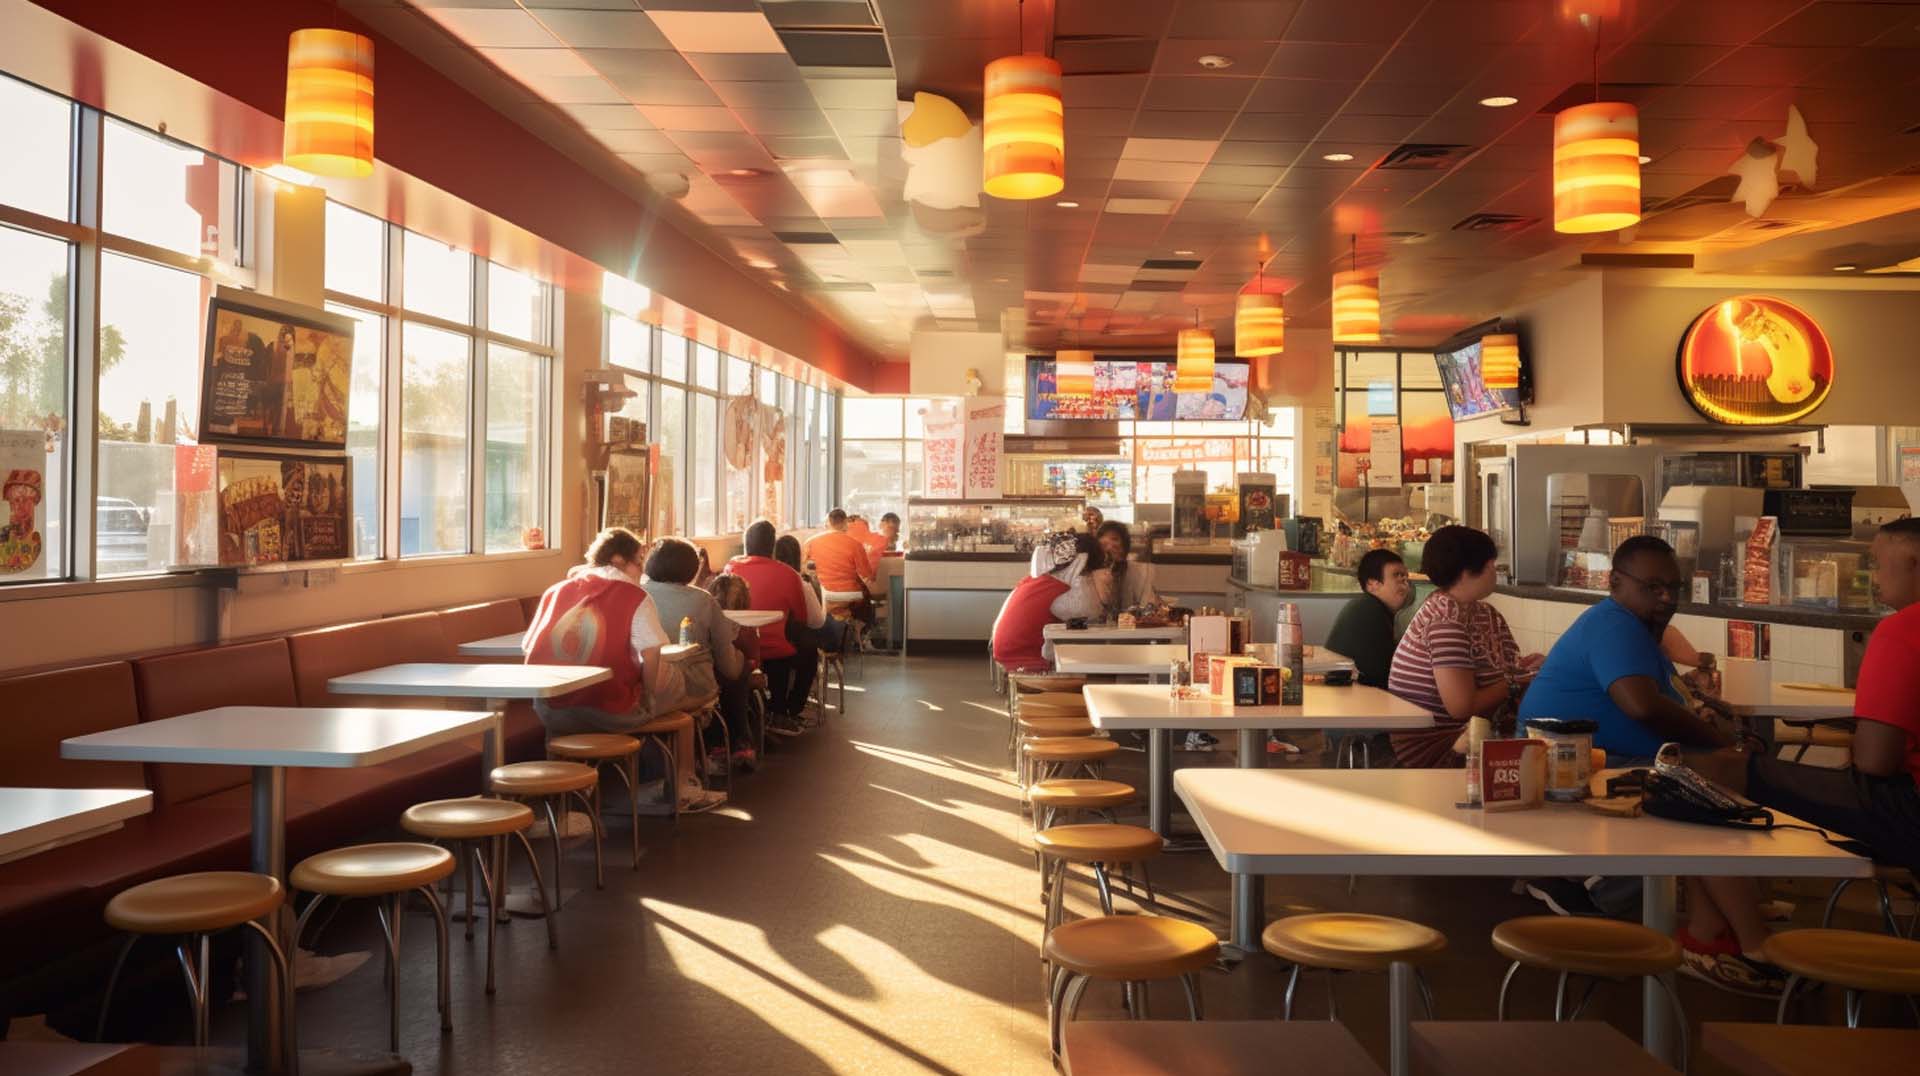 Houston has a wide variety of delicious fast food options to choose from.